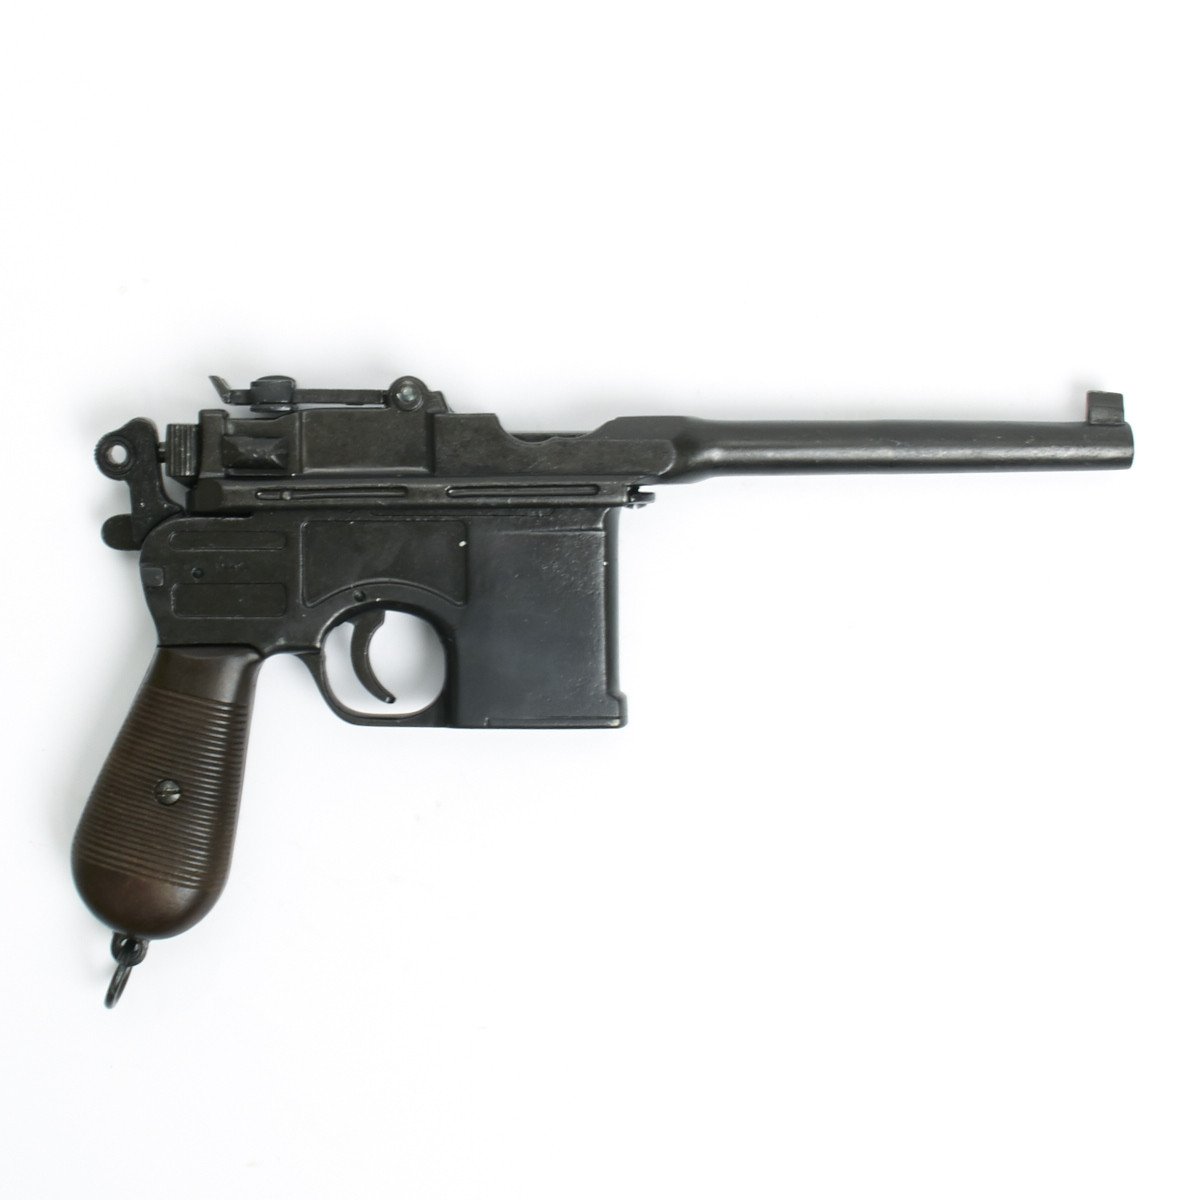 3. Mauser C96, invented in 1896 - an "assault weapon" for being a handgun which accepts a magazine in any location other than the grip